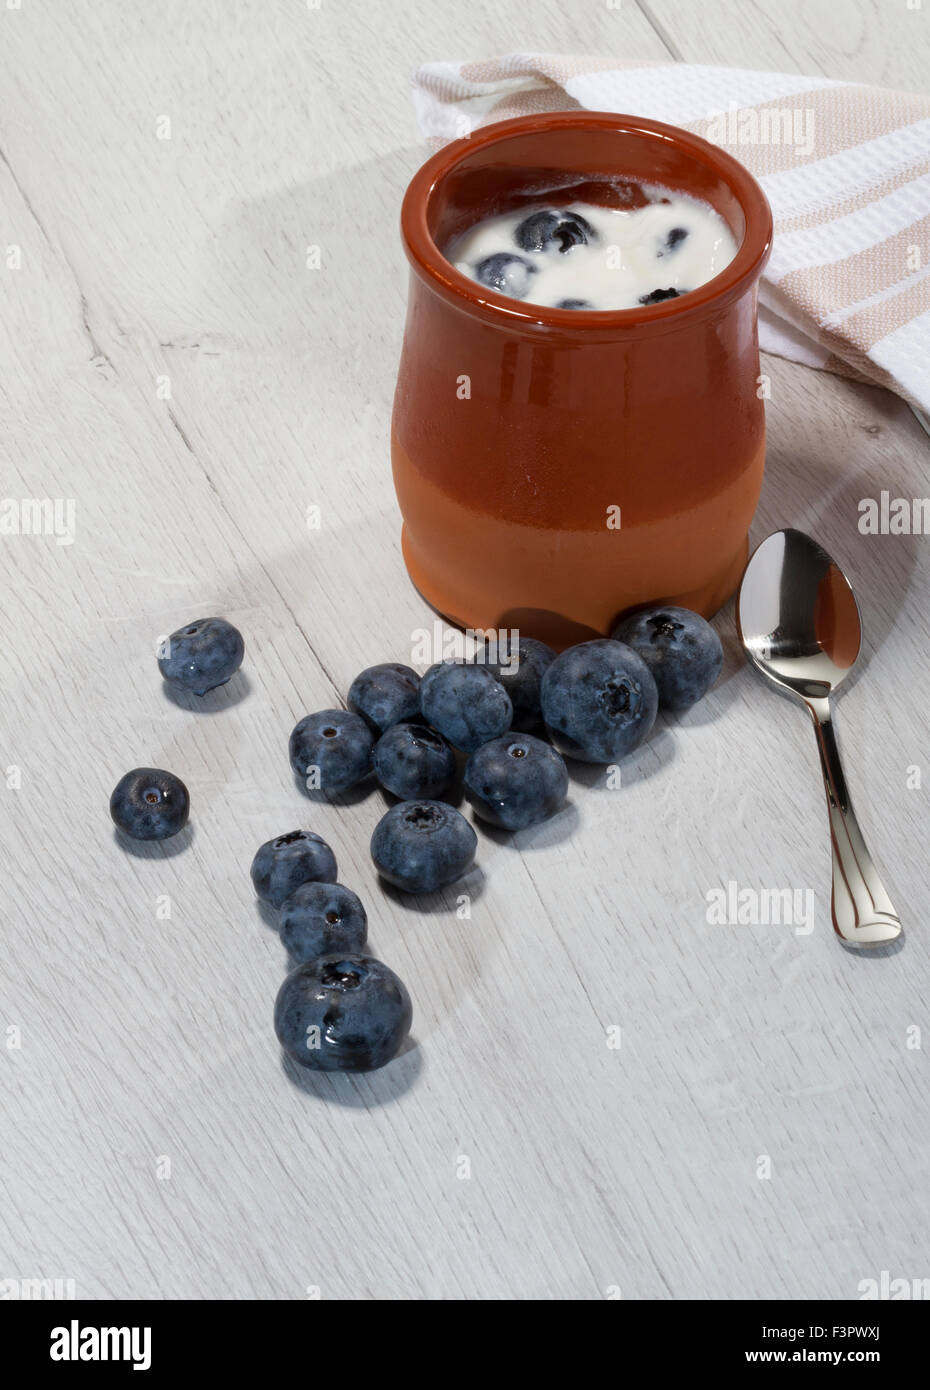 homemade yogurt with blueberries in a traditional clay pot Stock Photo